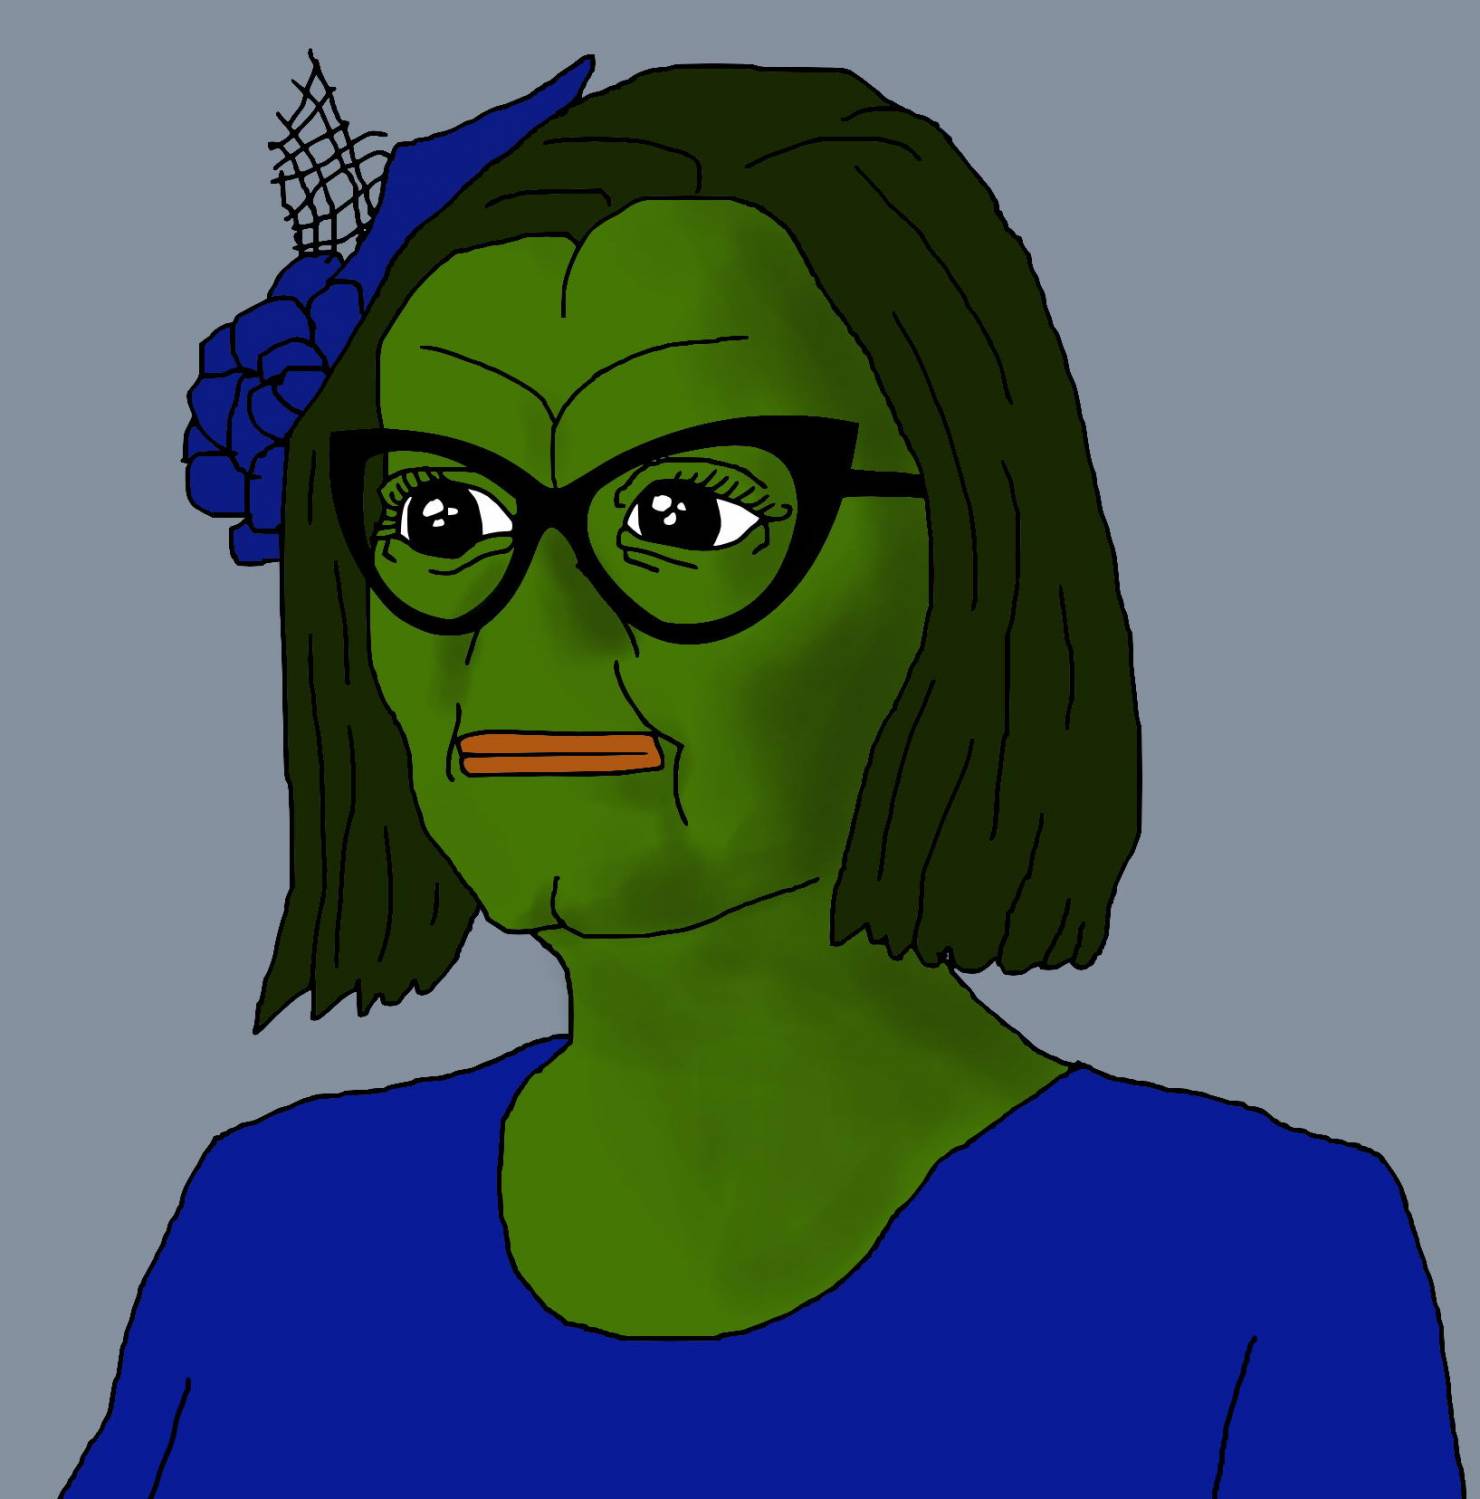 Triggered - Pepe The Frog